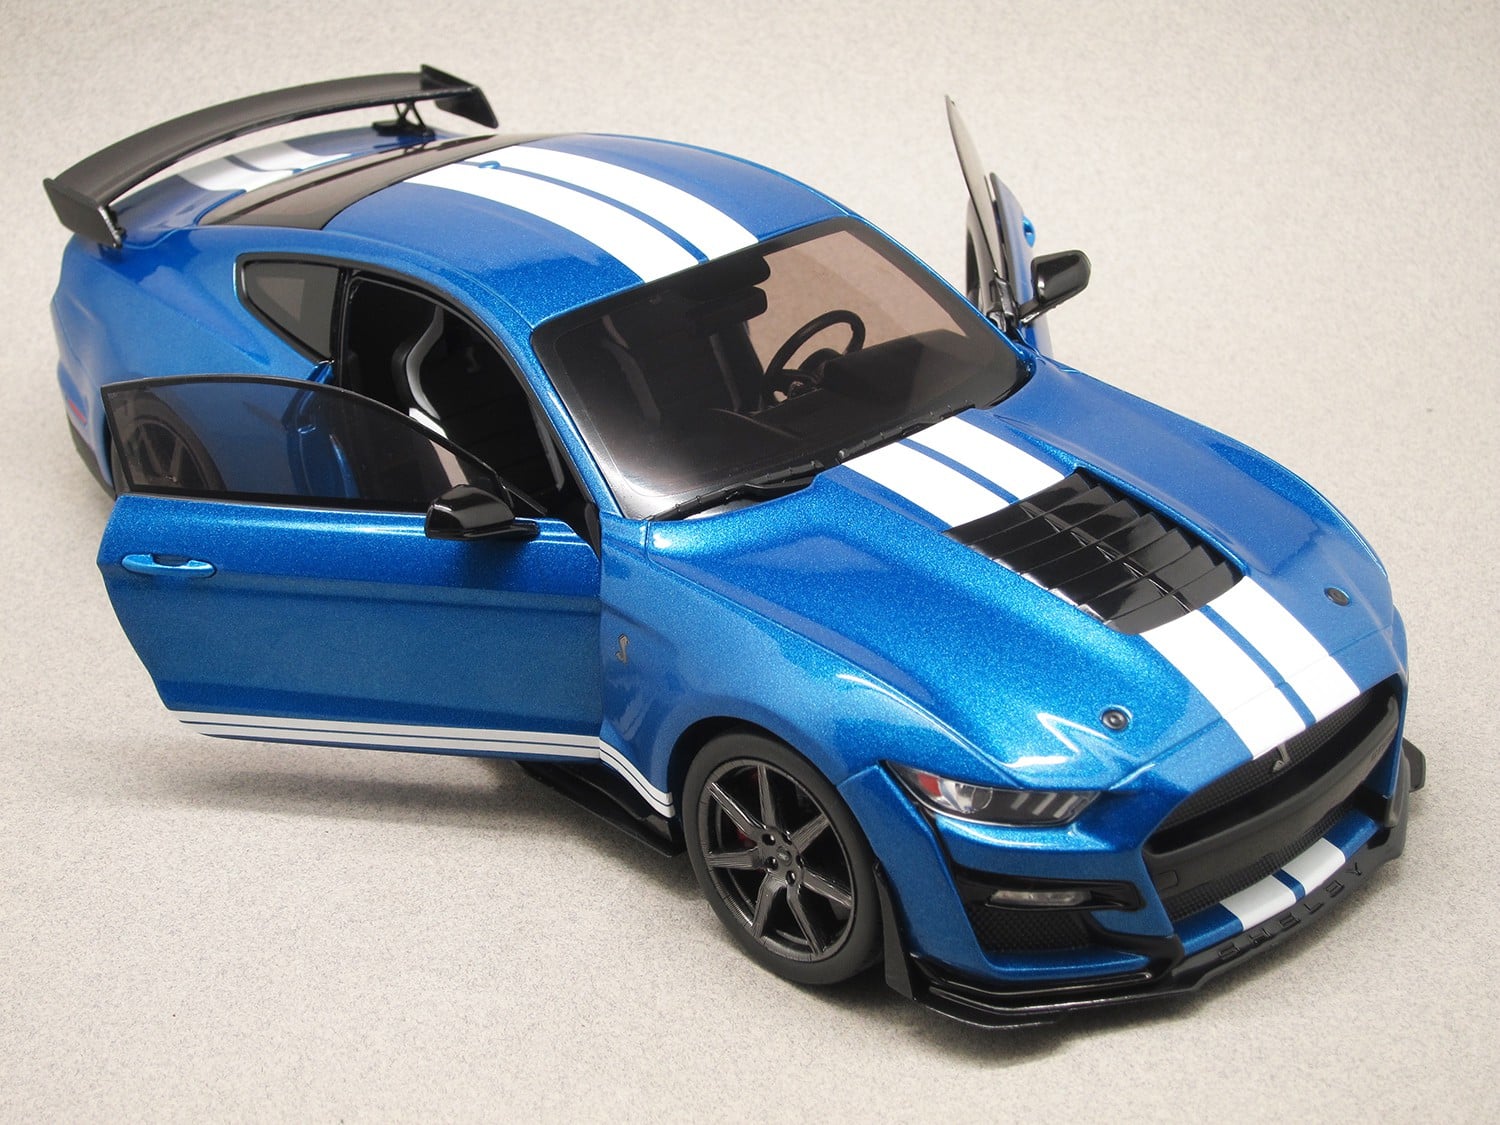 Ford Mustang Shelby 500 GT 2019 (Solido) 1:18